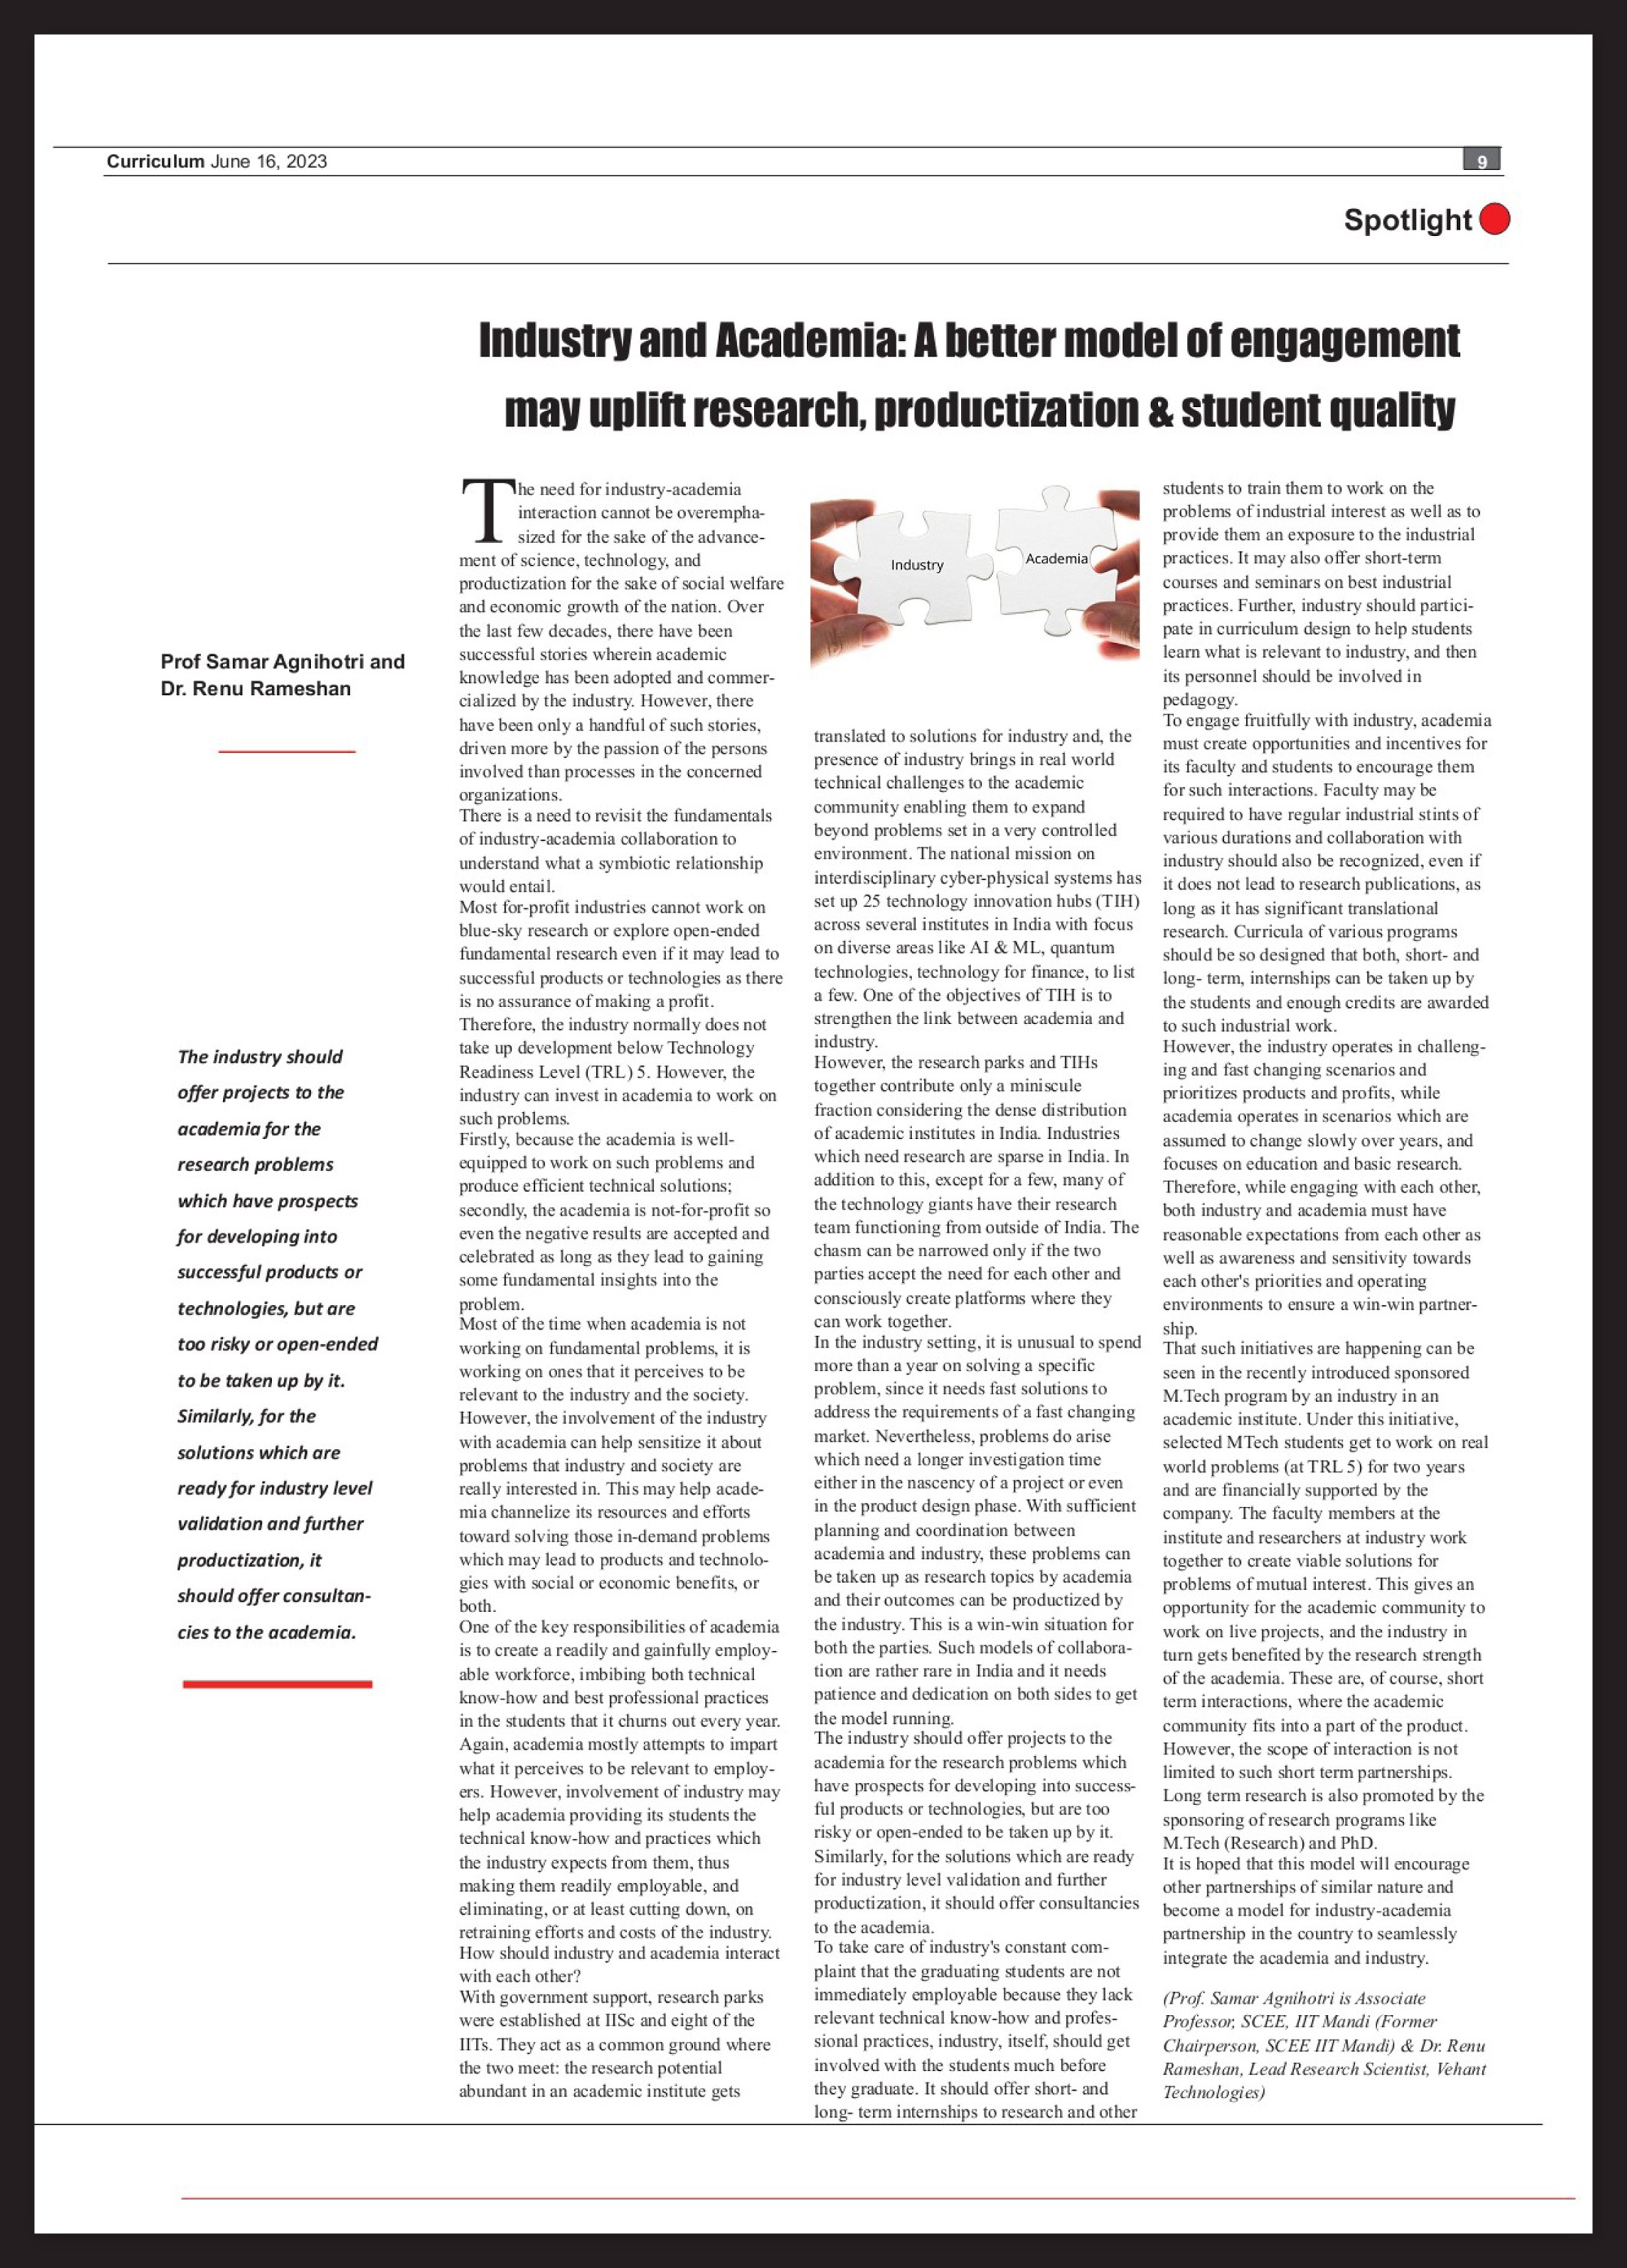 Curriculum Magazine highlighted 'Industry and Academia Collaboration'